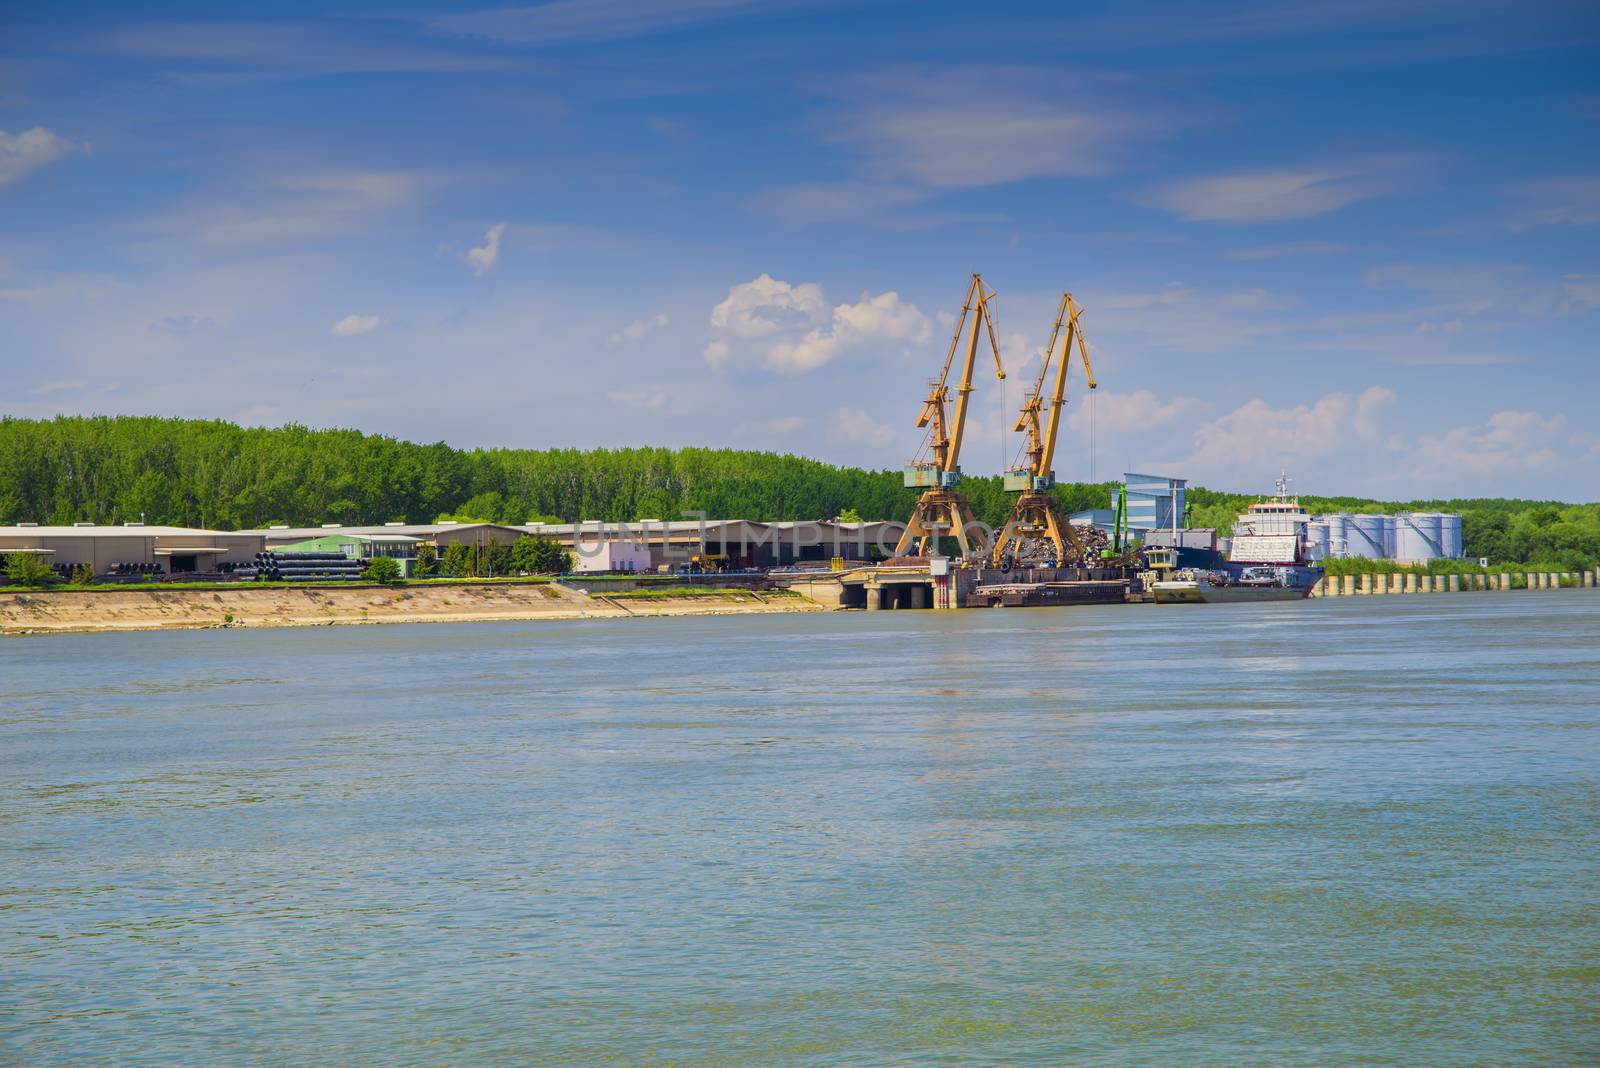 Shipyard with cranes on Danube river by savcoco